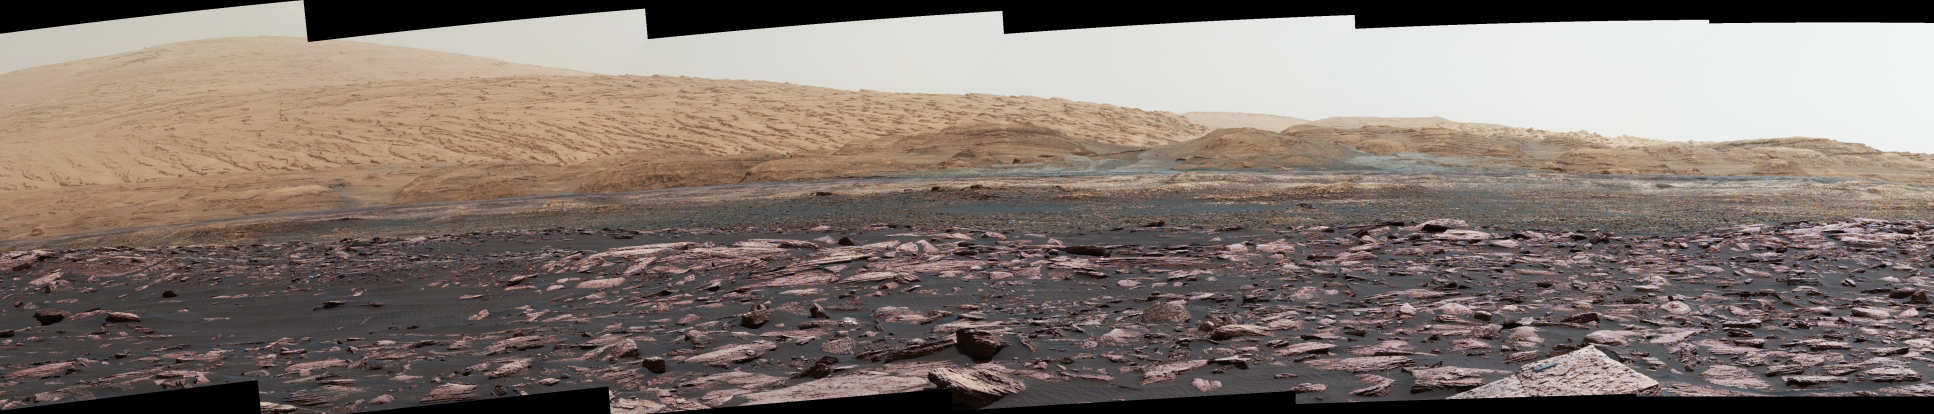 Photo taken by the Curiosity Rover on Mars showing a rocky, mountainous landscape.